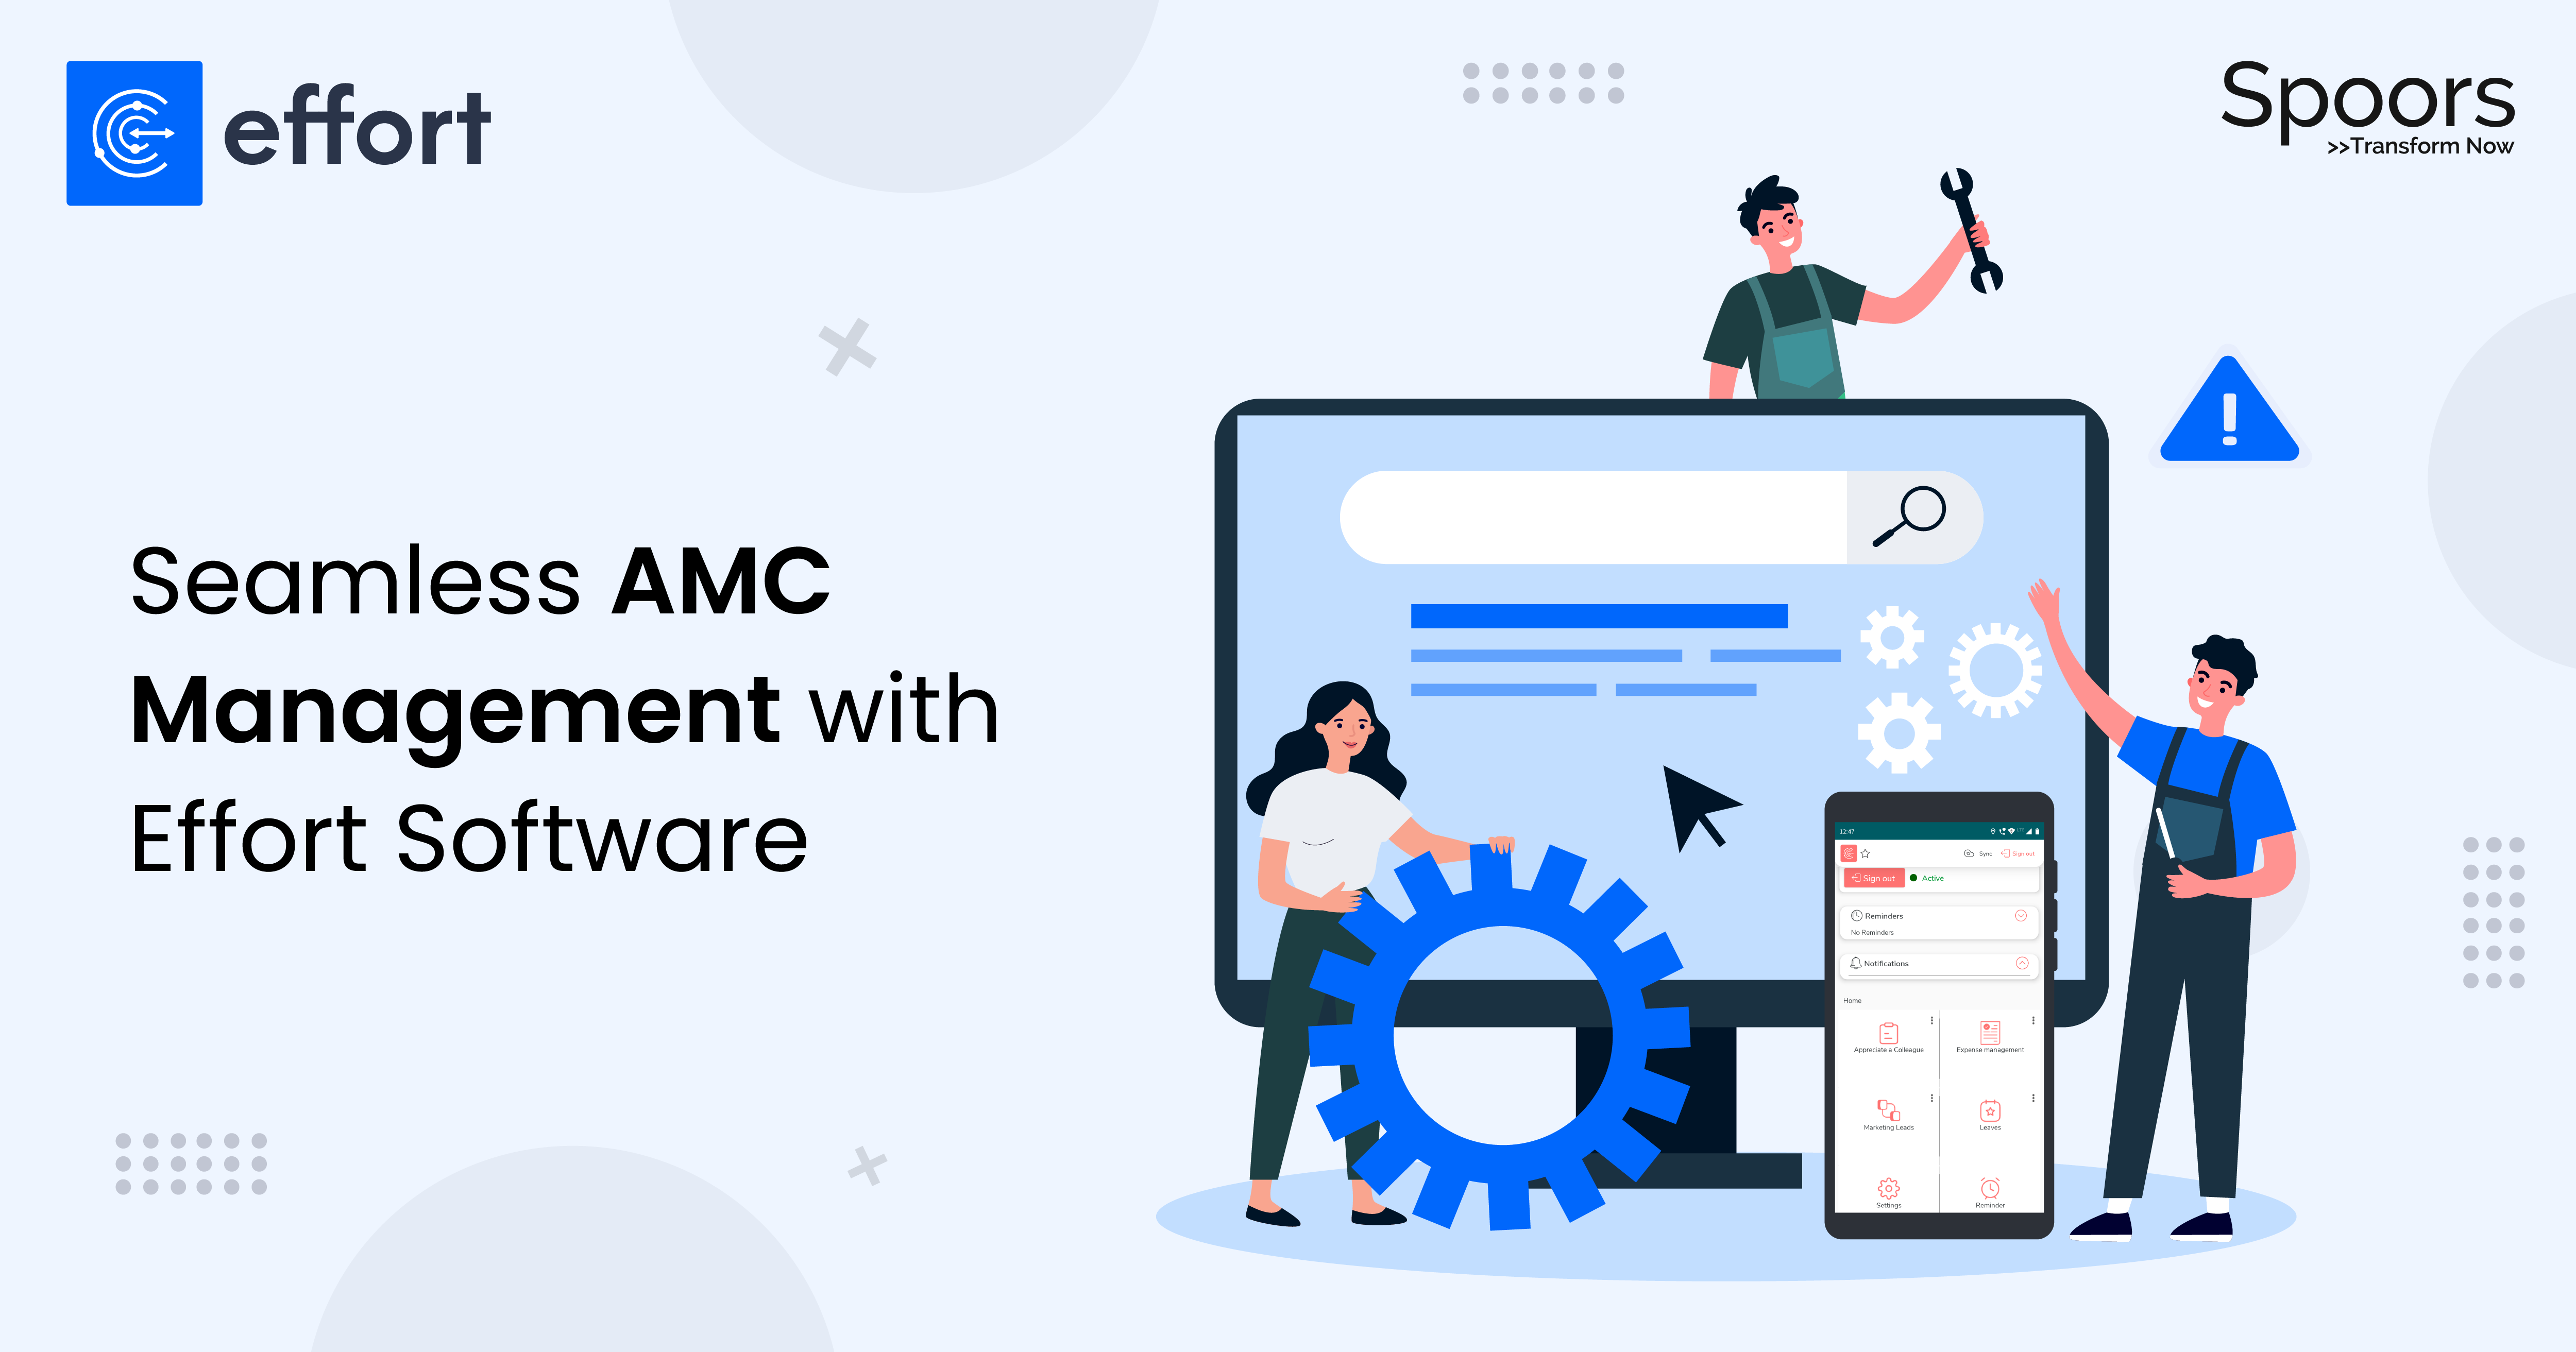 Seamless AMC Management with Effort Software